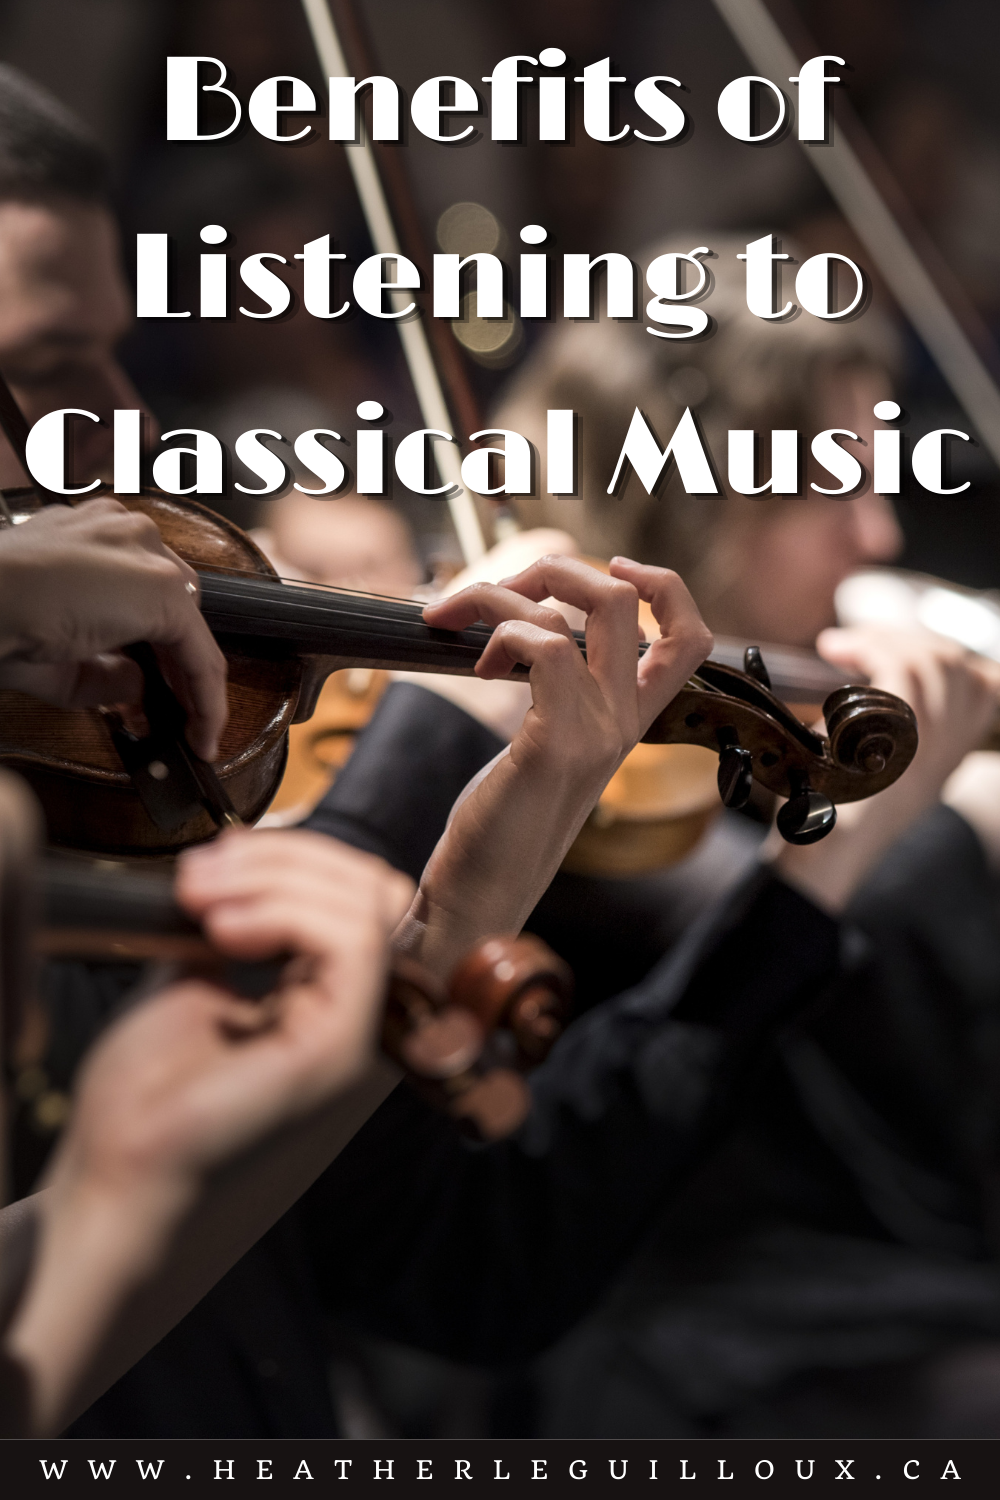 September is here and it’s time to celebrate all things Classical Music for Classical Music Month! Each year, this month brings us the perfect excuse to play, perform, listen, compose, and appreciate the classical music of today and throughout history. #classicalmusic #music #healthbenefits